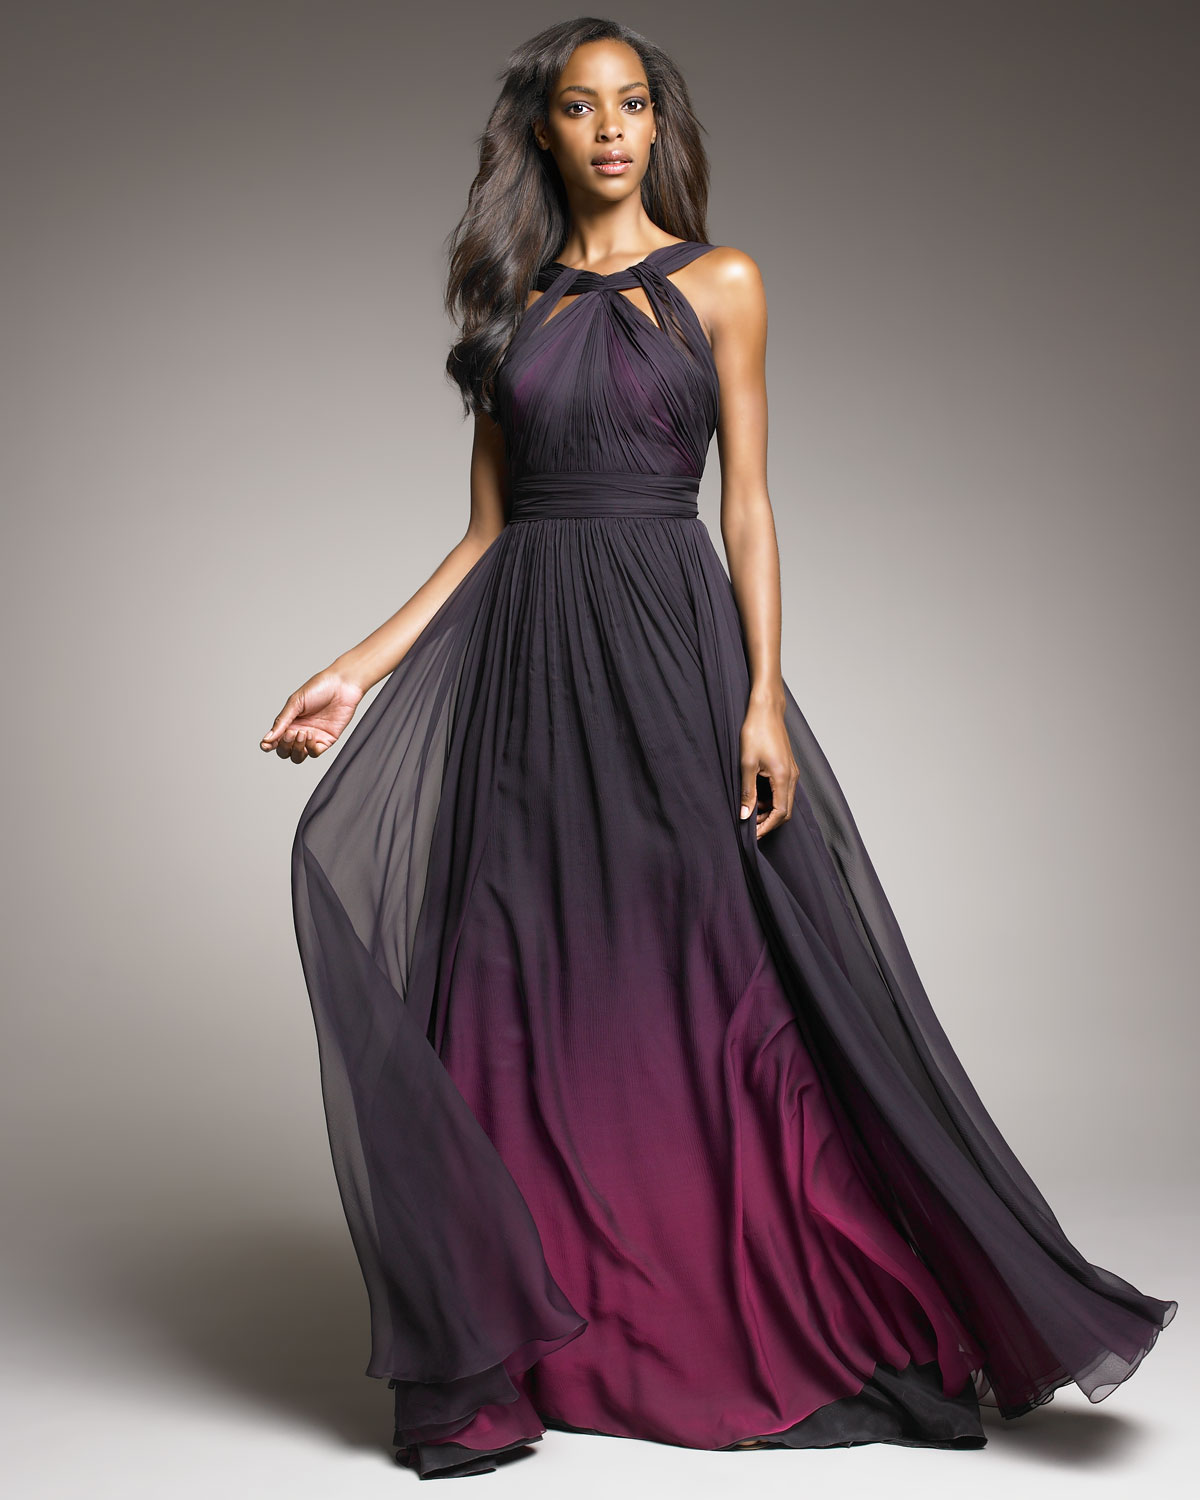 Black and purple ombre dress | Ombre gown, Gowns, Ombre dress